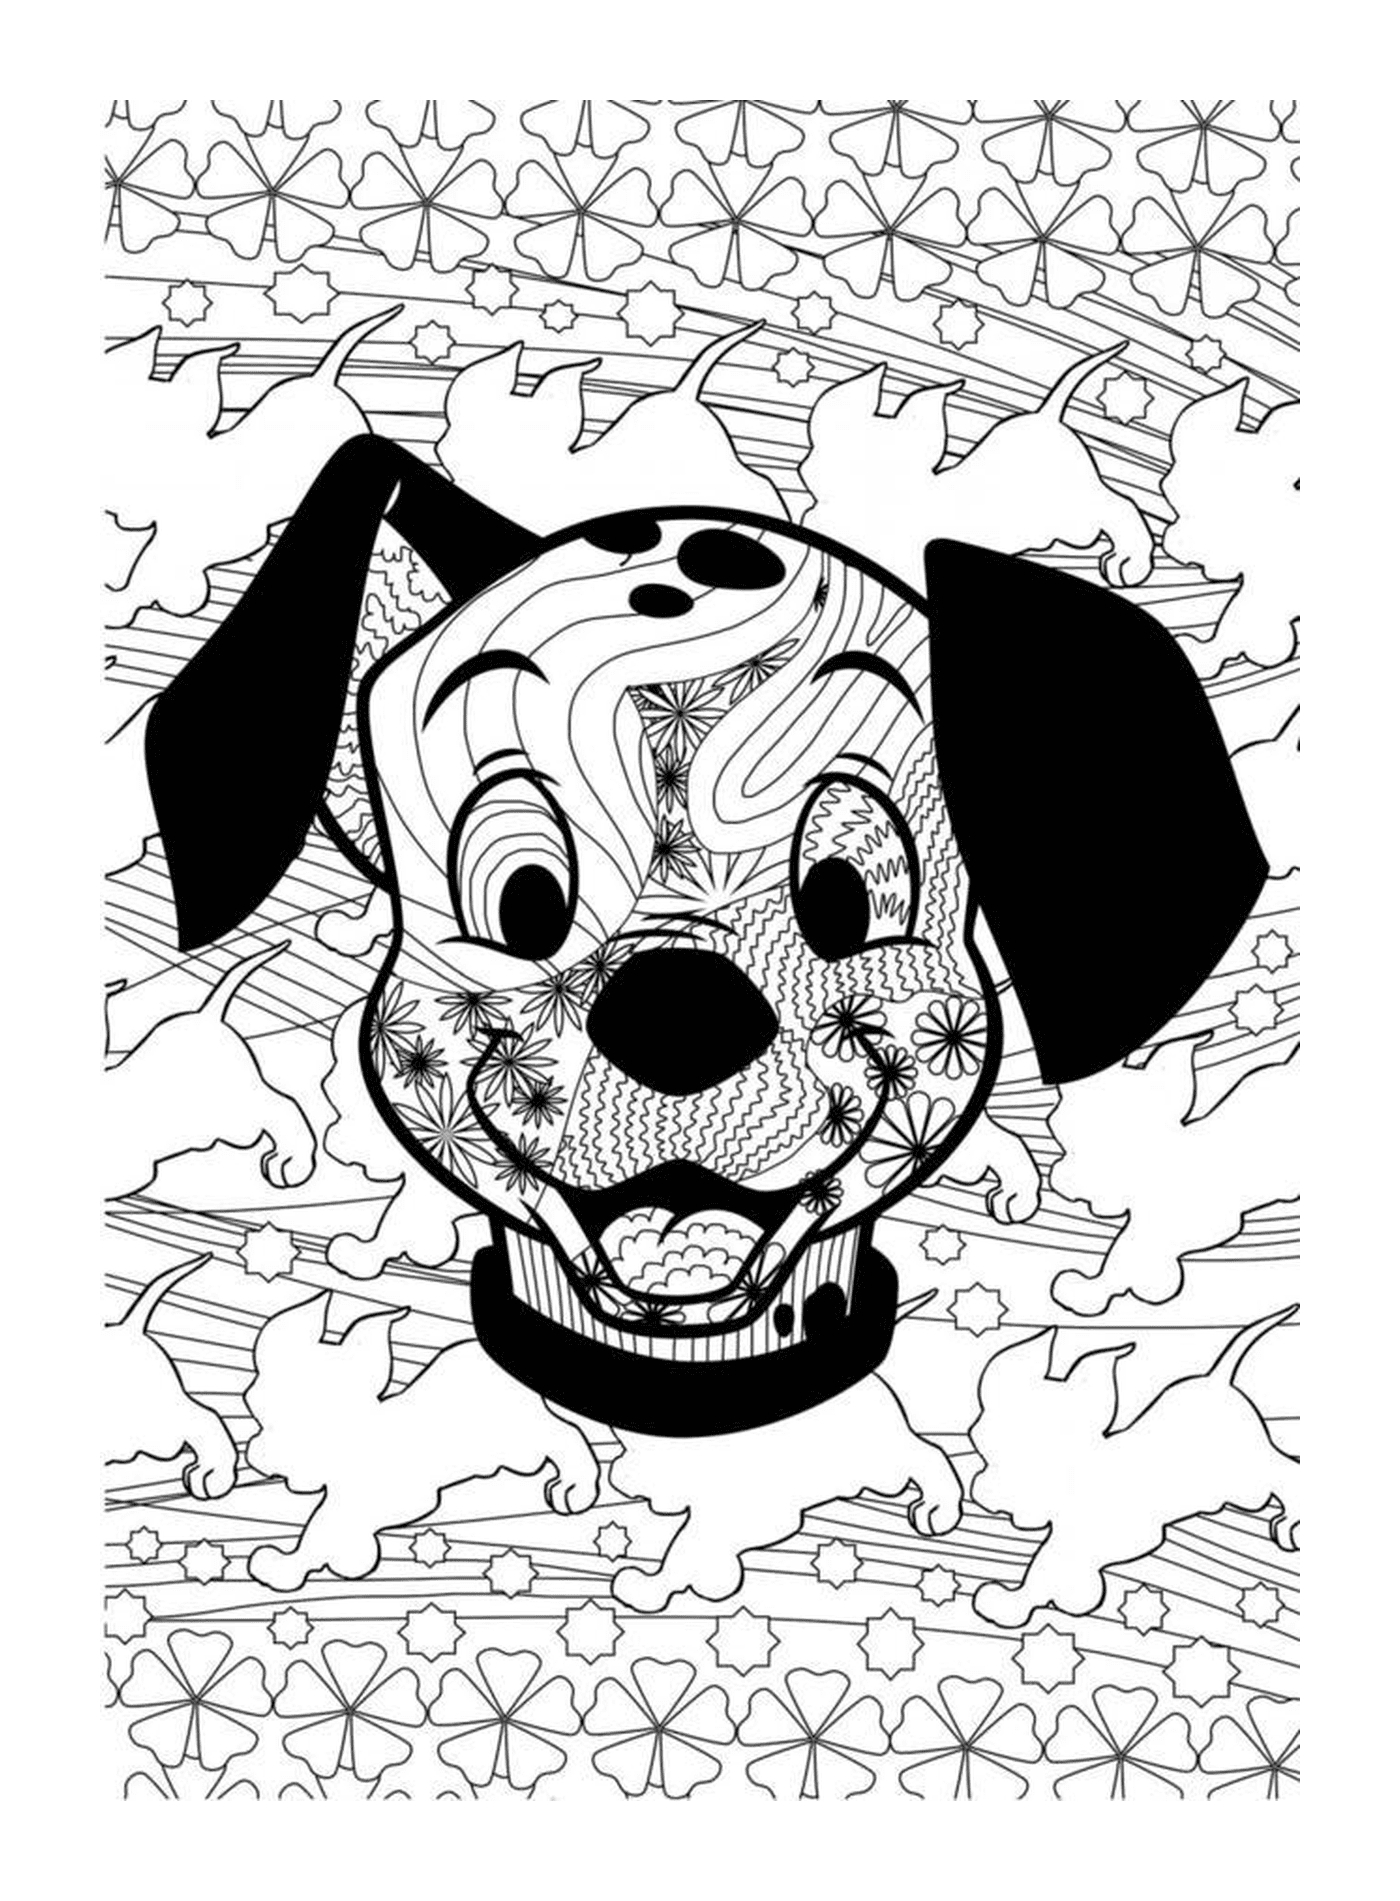  Drawing of a dog face 